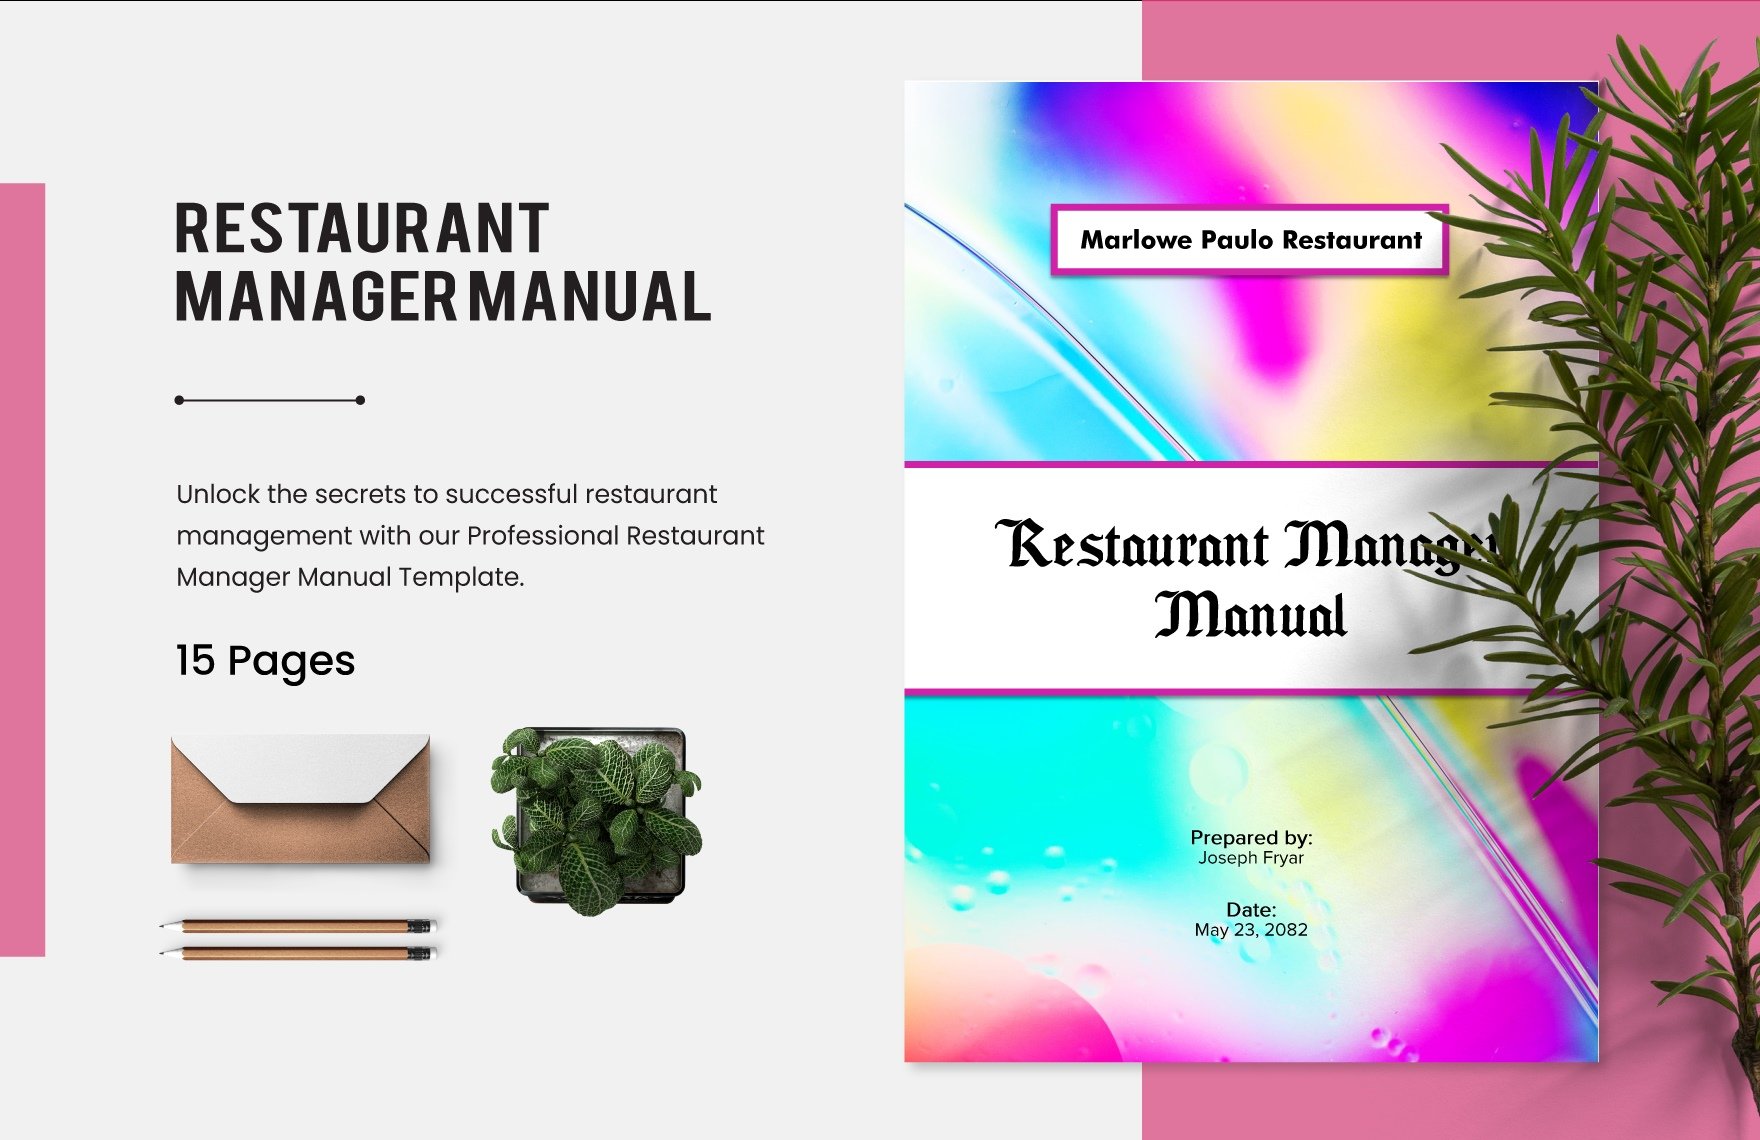 Restaurant Manager Manual Template in Word, Google Docs, PDF